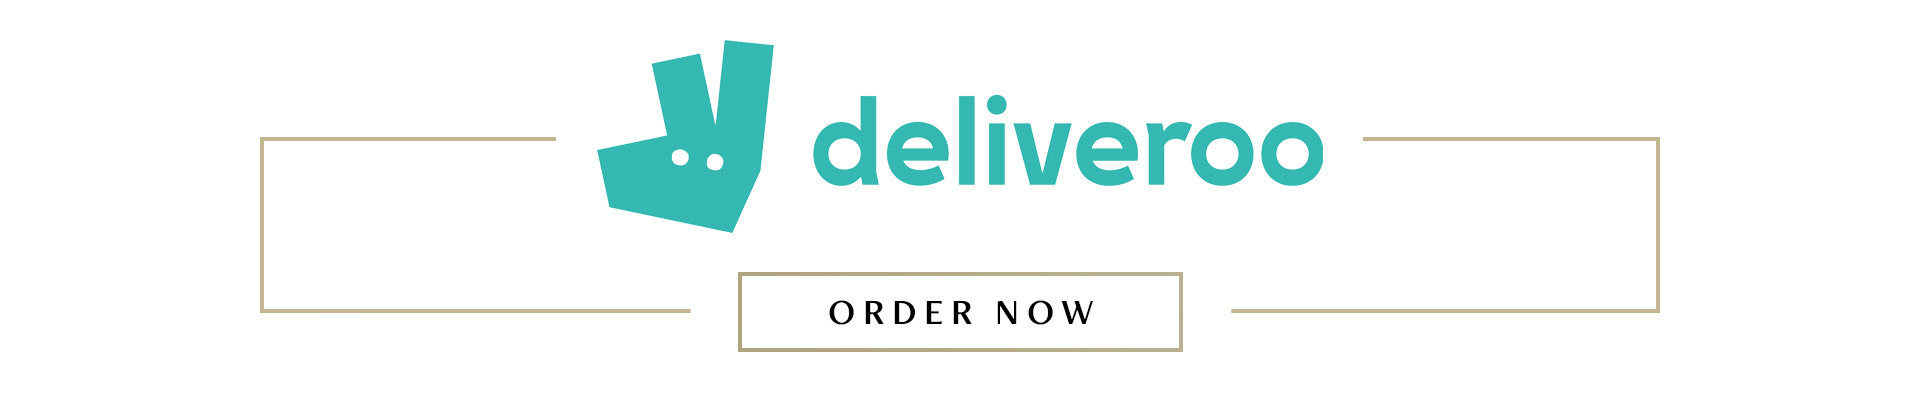 browns-deliveroo-banner-thin.jpg